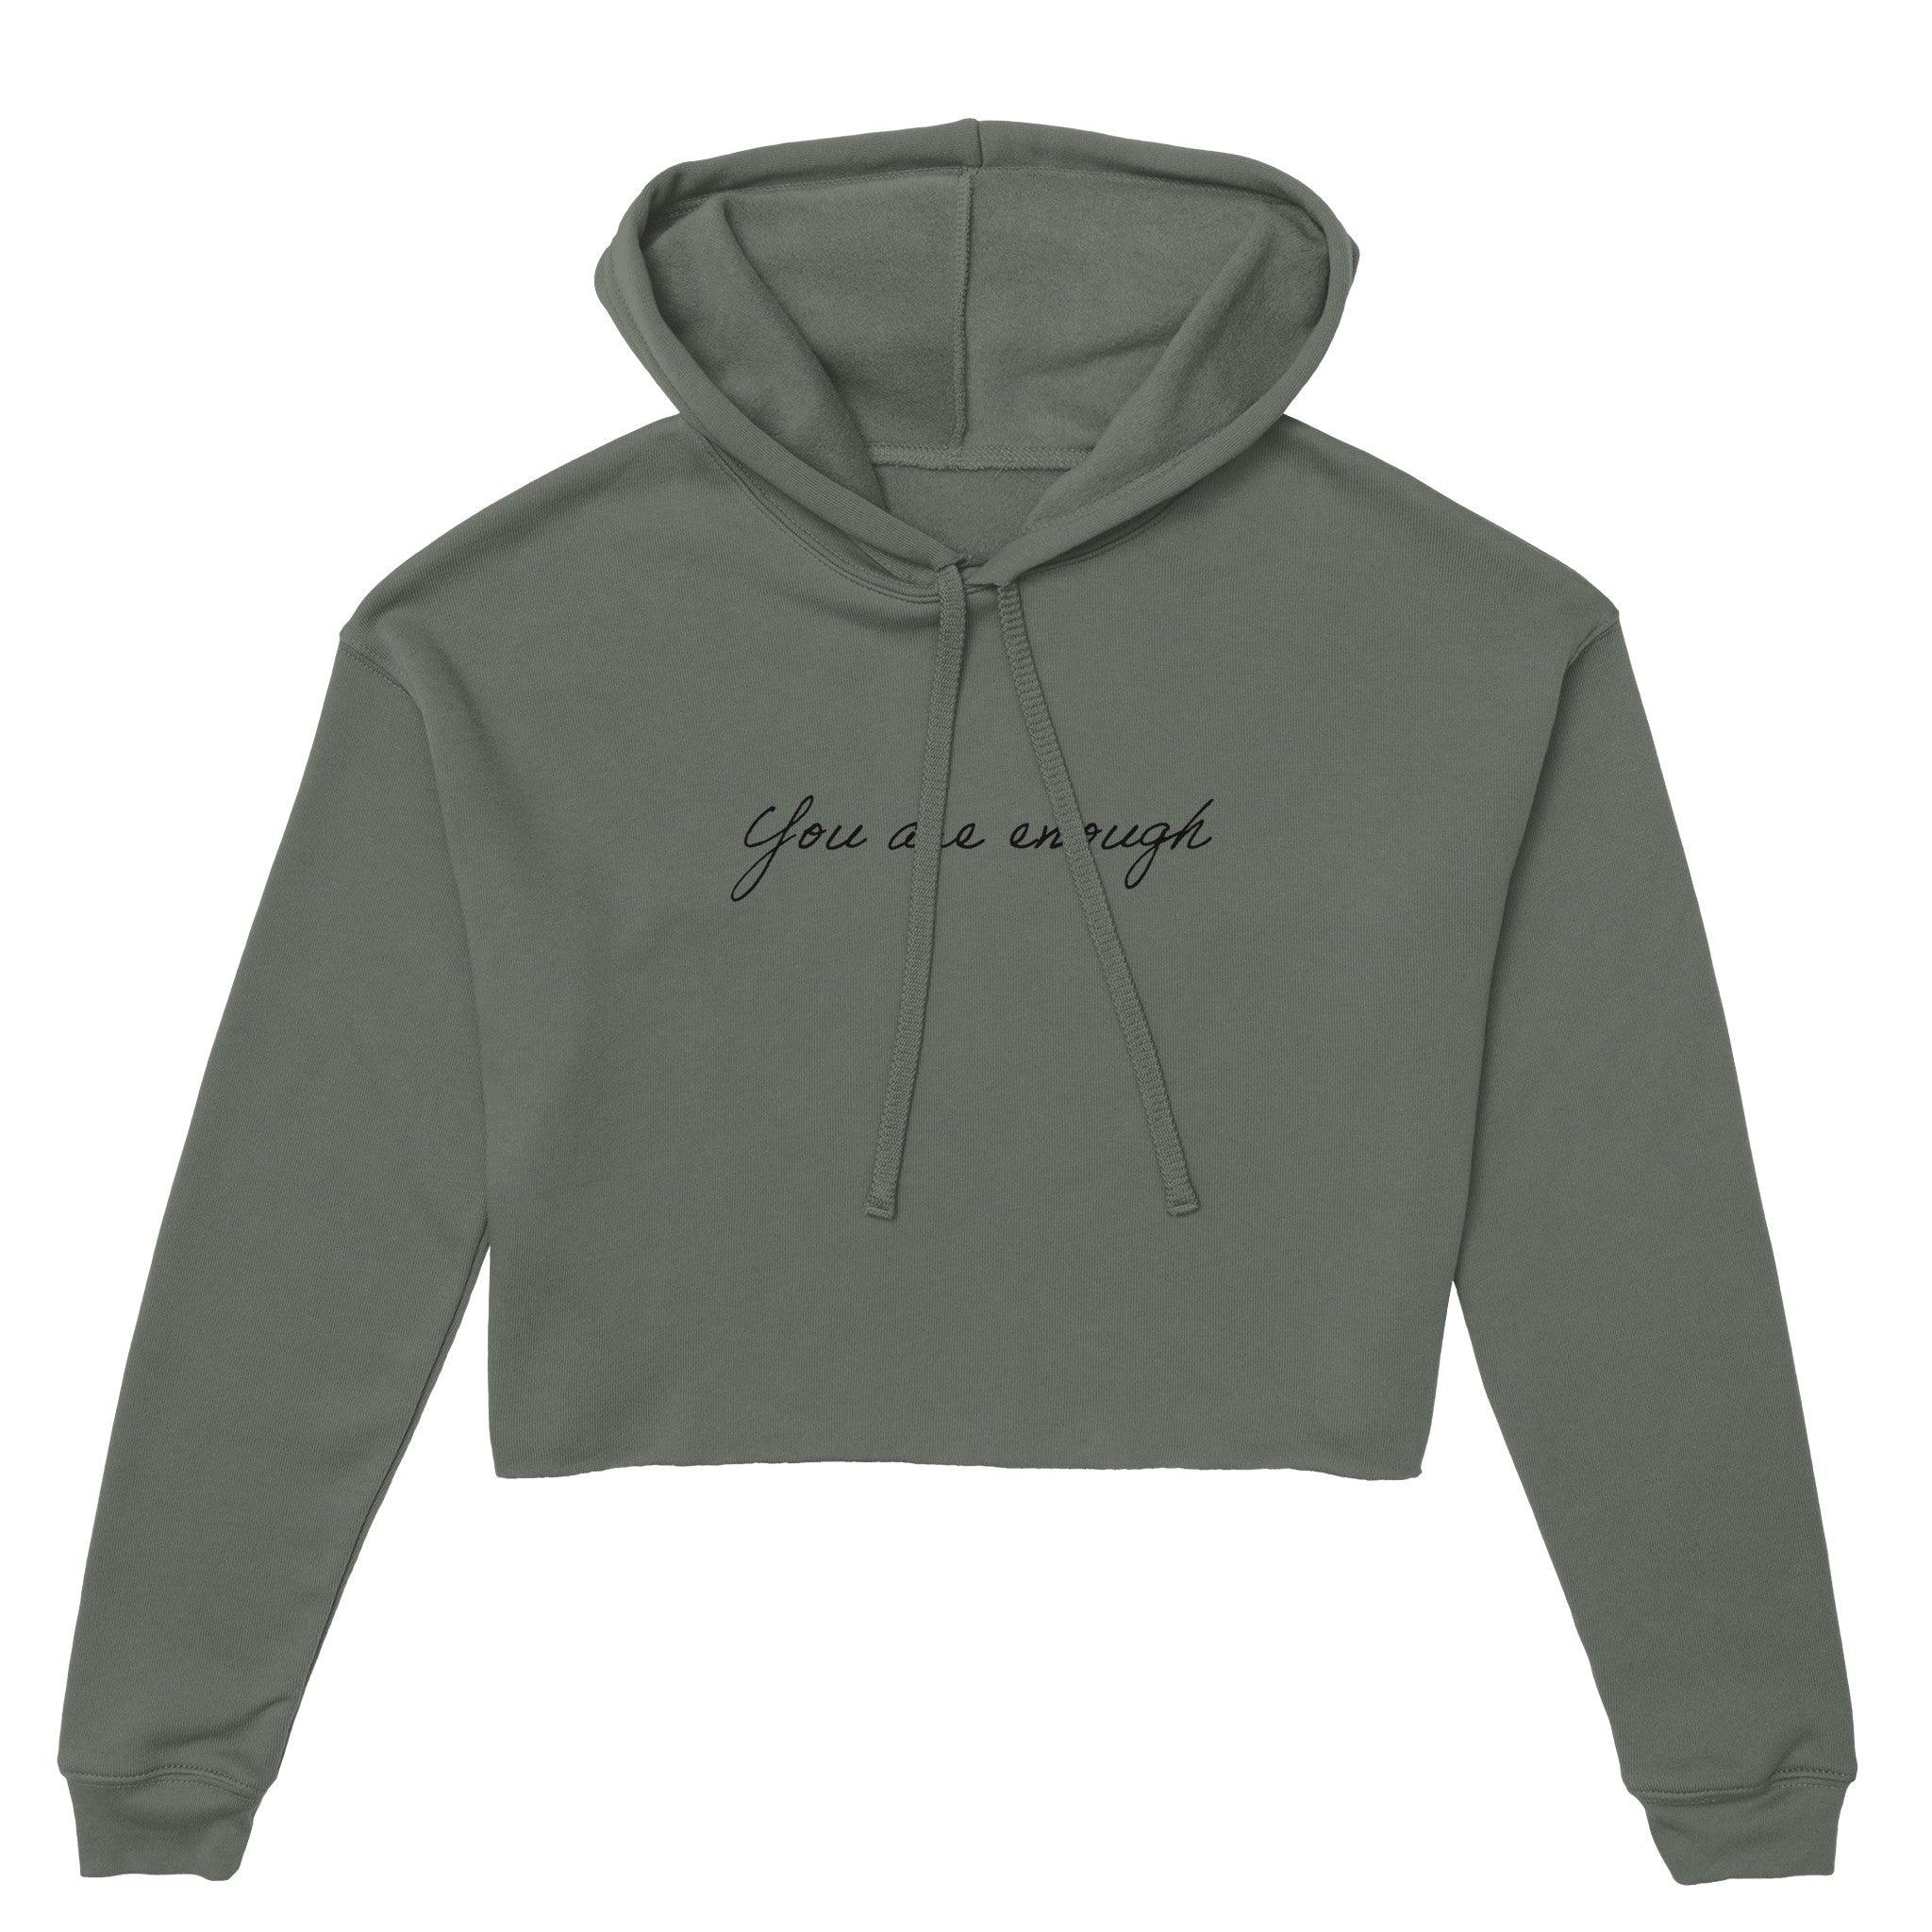 'You are enough' Cropped Hoodie - POMA